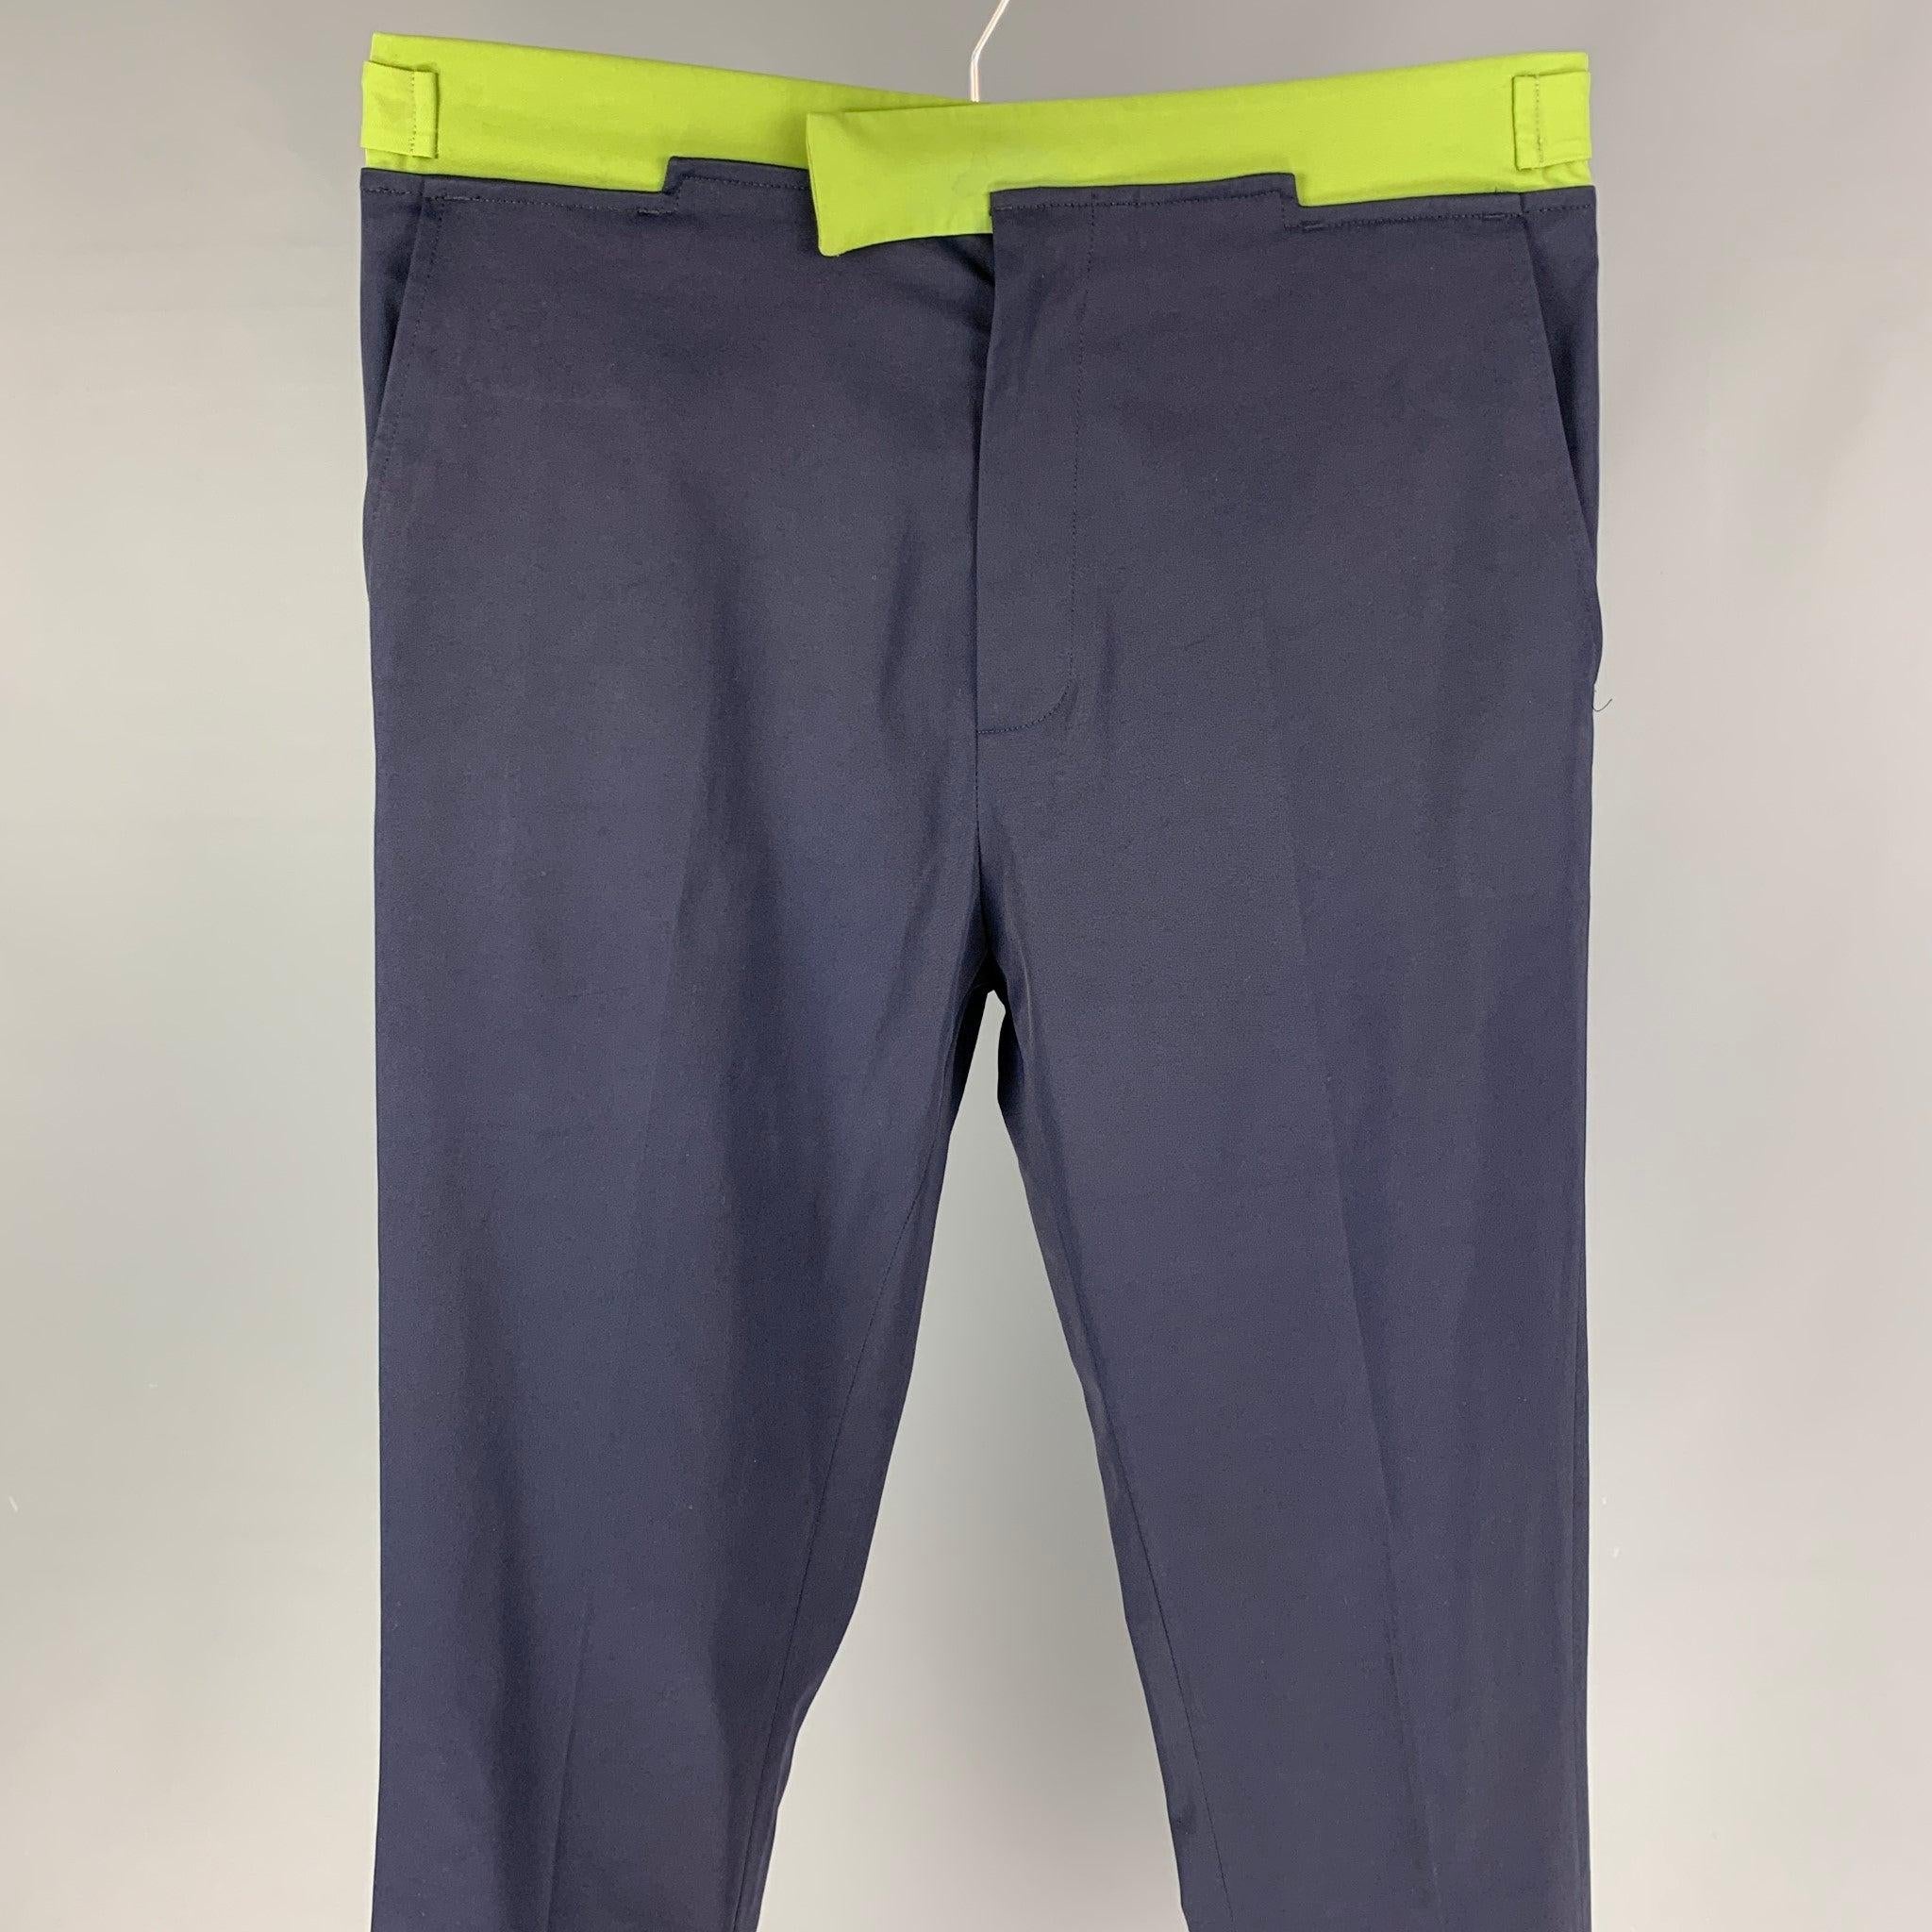 BOTTEGA VENETA casual pants comes in a blue & green color block wool featuring a slim fit, flat front, adjustable side straps, front tab, and a zip fly closure. Made in Italy.
Very Good
Pre-Owned Condition. 

Marked:   50 / Altered from 34 Size to